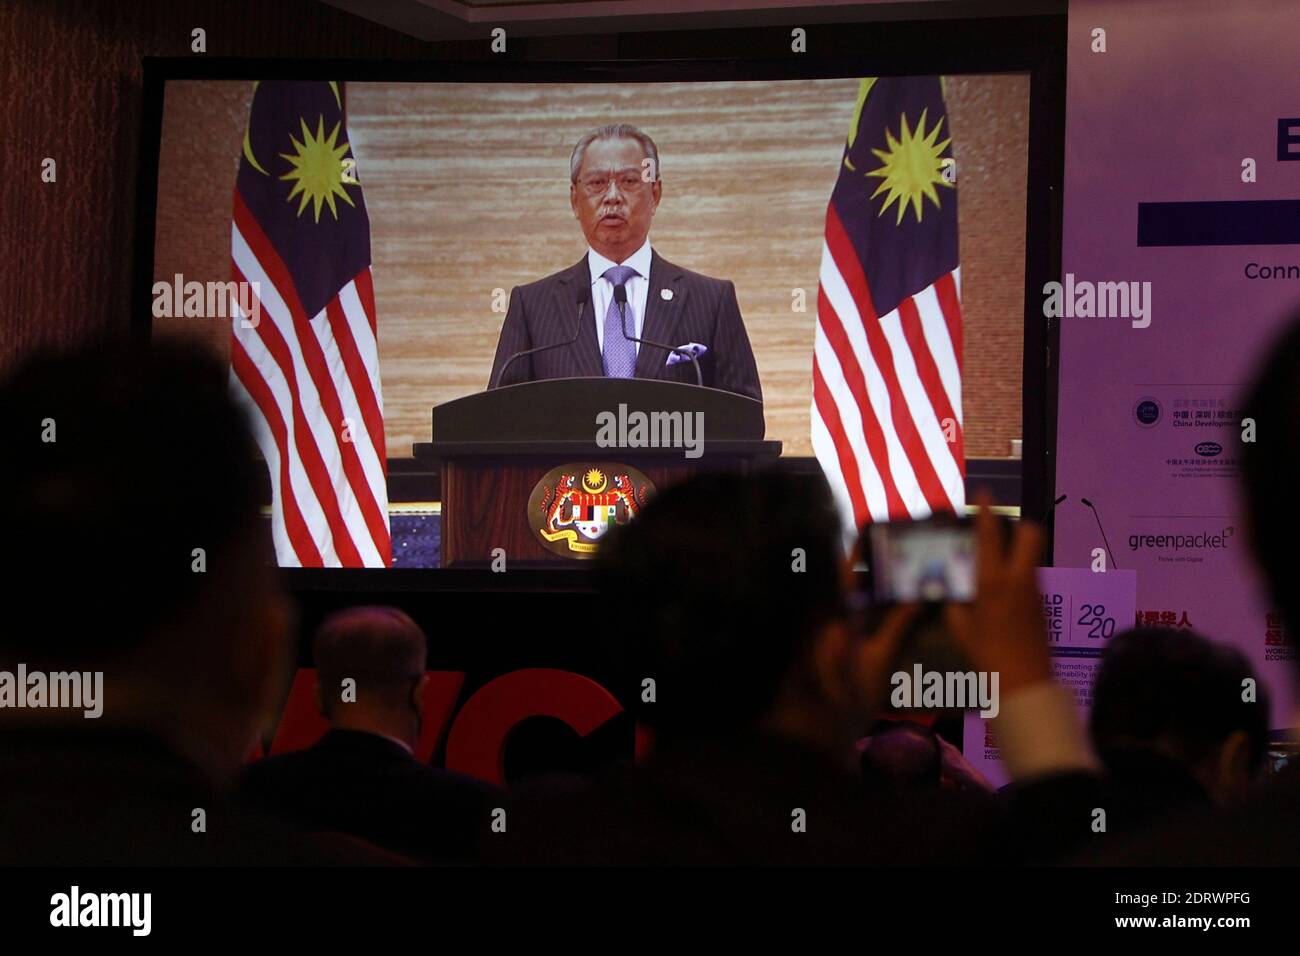 Kuala Lumpur. 21st Dec, 2020. Malaysian Prime Minister Muhyiddin Yassin delivers a speech via video during the World Chinese Economic Summit 2020 in Kuala Lumpur, Malaysia, Dec. 21, 2020. China has played a significant role in upholding the international trading system and opposing protectionism and unilateralism since the outbreak of COVID-19, Malaysian Prime Minister Muhyiddin Yassin said on Monday.TO GO WITH 'China has played significant role in upholding int'l trading system: Malaysian PM' Credit: Xinhua/Alamy Live News Stock Photo